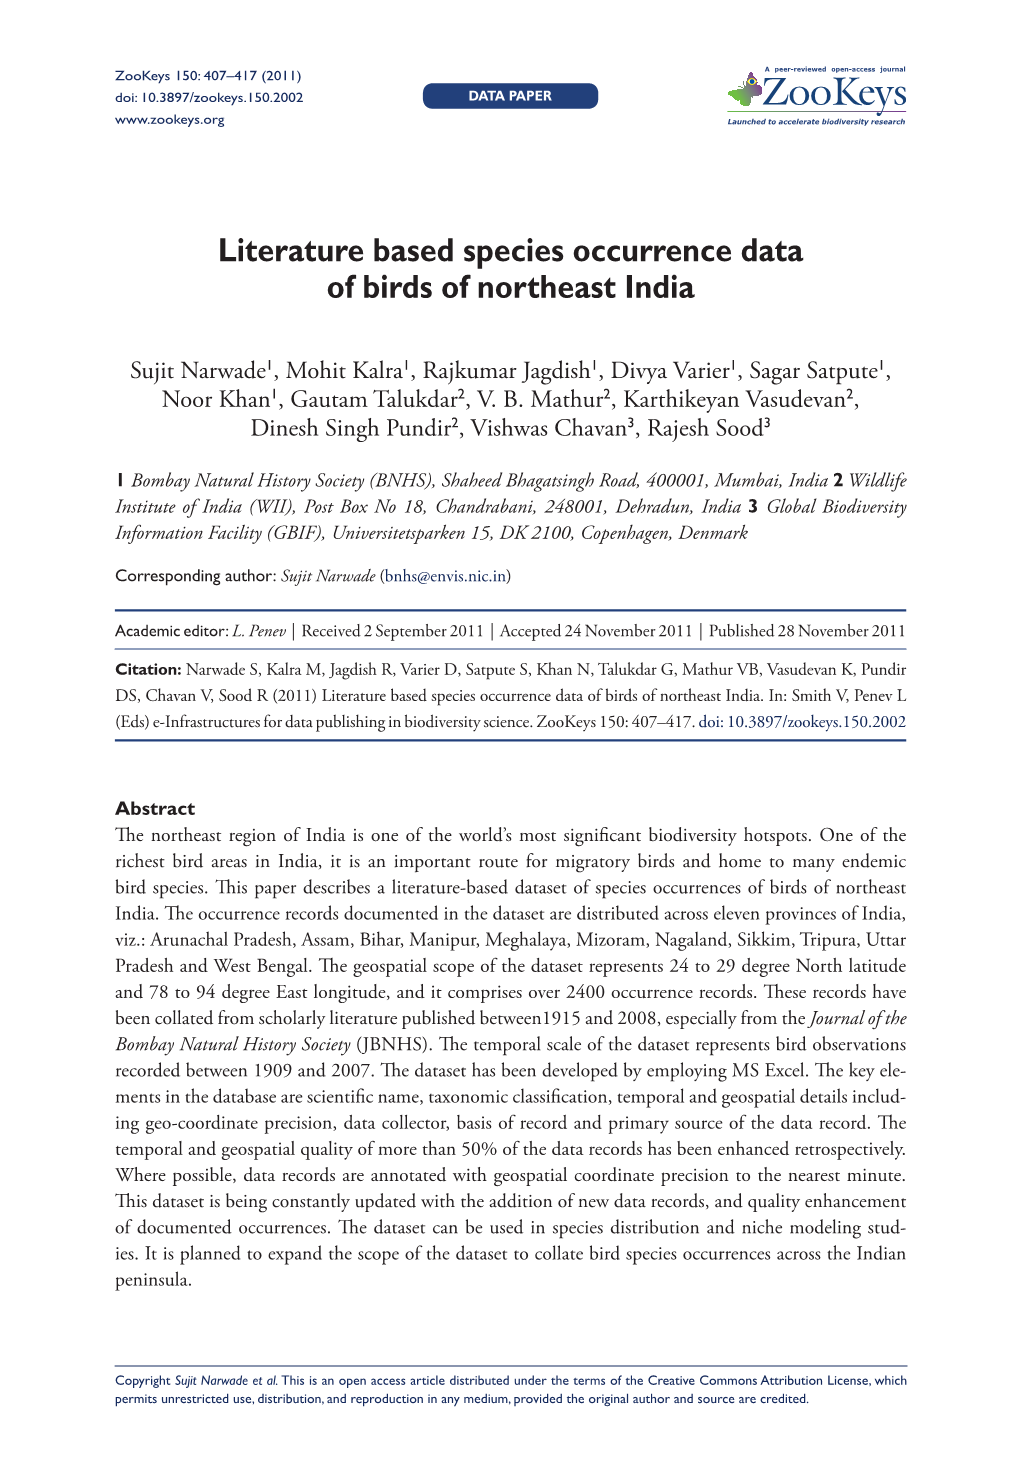 Literature Based Species Occurrence Data of Birds of Northeast India